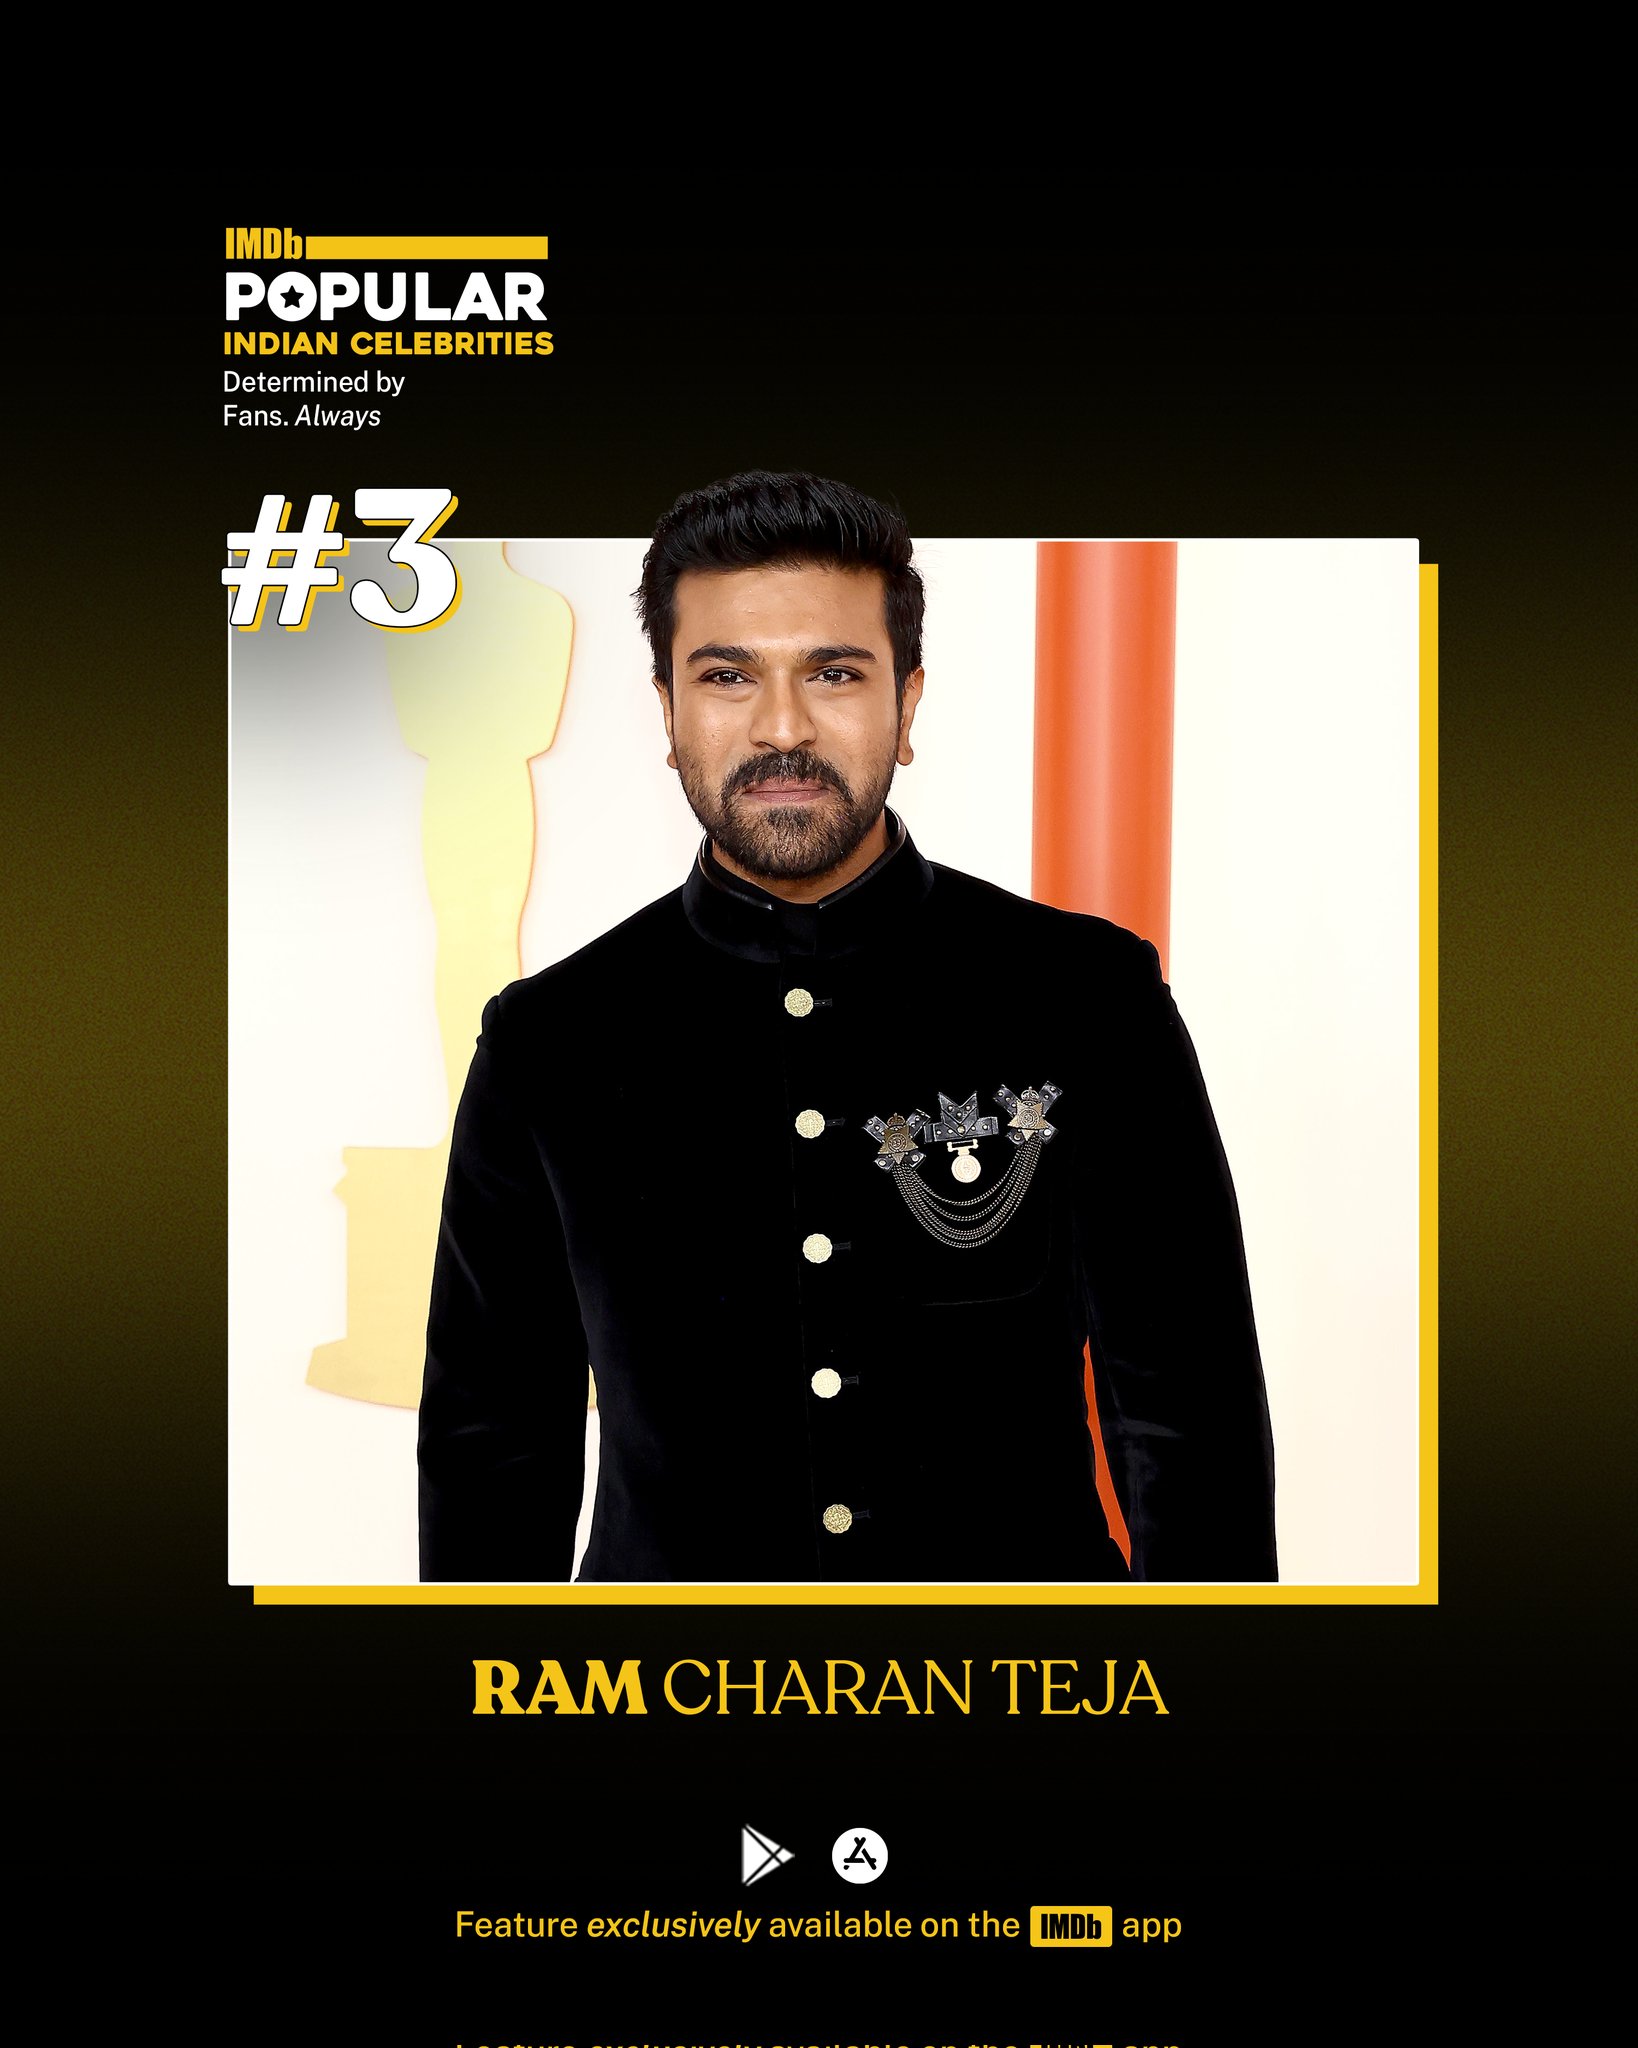 IMDb India on Twitter: "As the Oscars buzz grew moving into the week of  @TheAcademy Awards, @AlwaysRamCharan's fans rooted for the movie's success,  placing him at #3 on the Popular Indian Celebrities